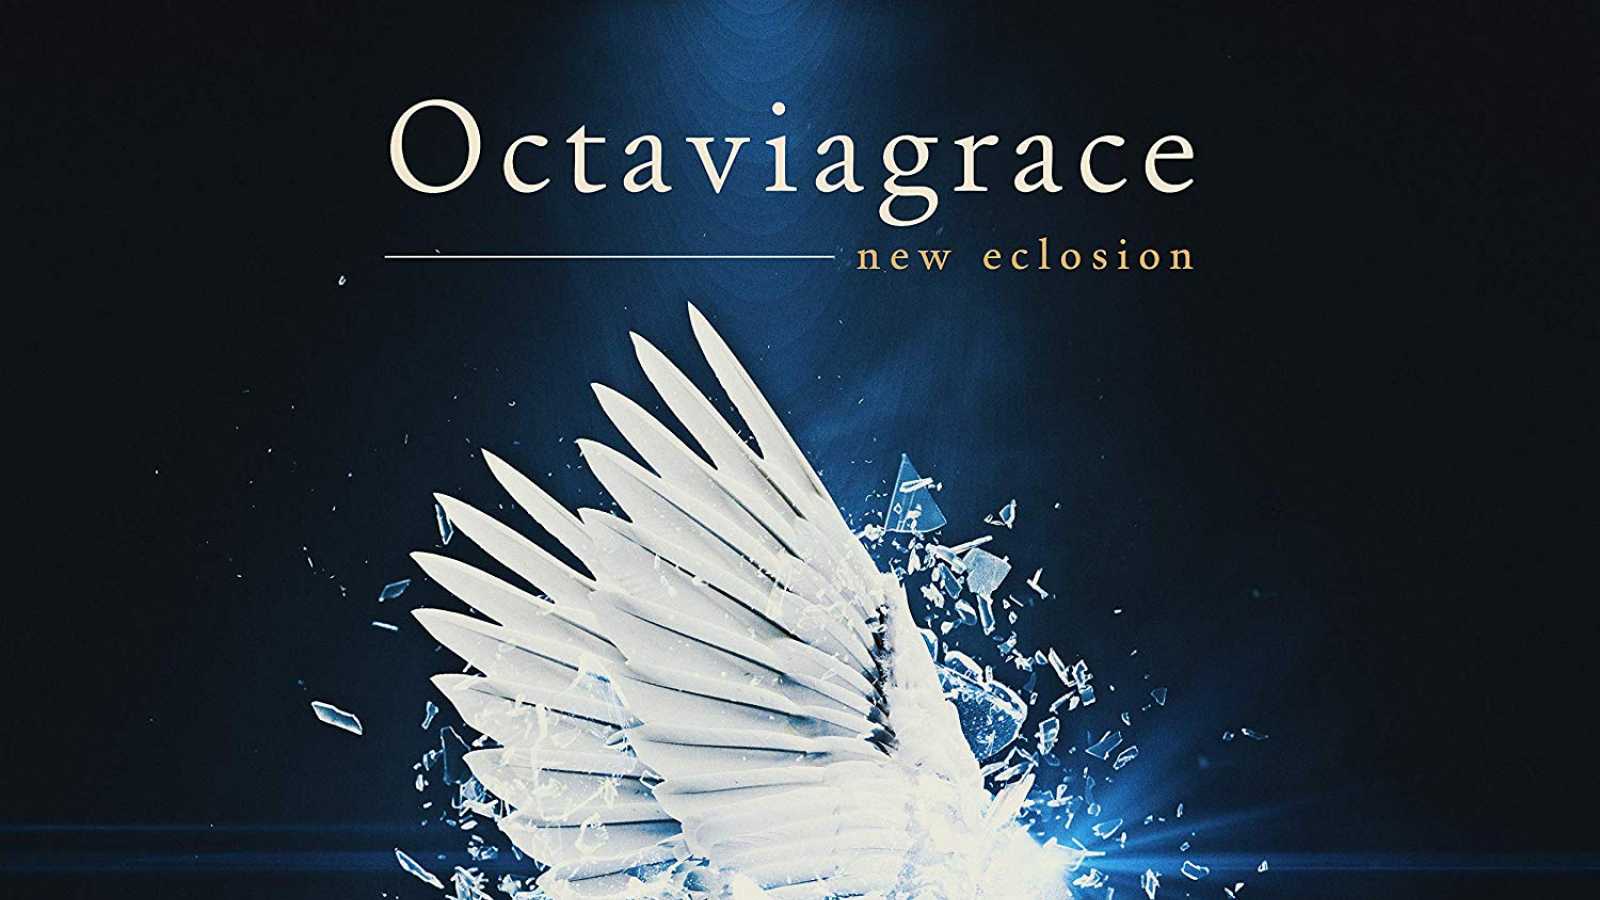 ﻿Octaviagrace - new eclosion © JVCKENWOOD Victor Entertainment Corp. All rights reserved.